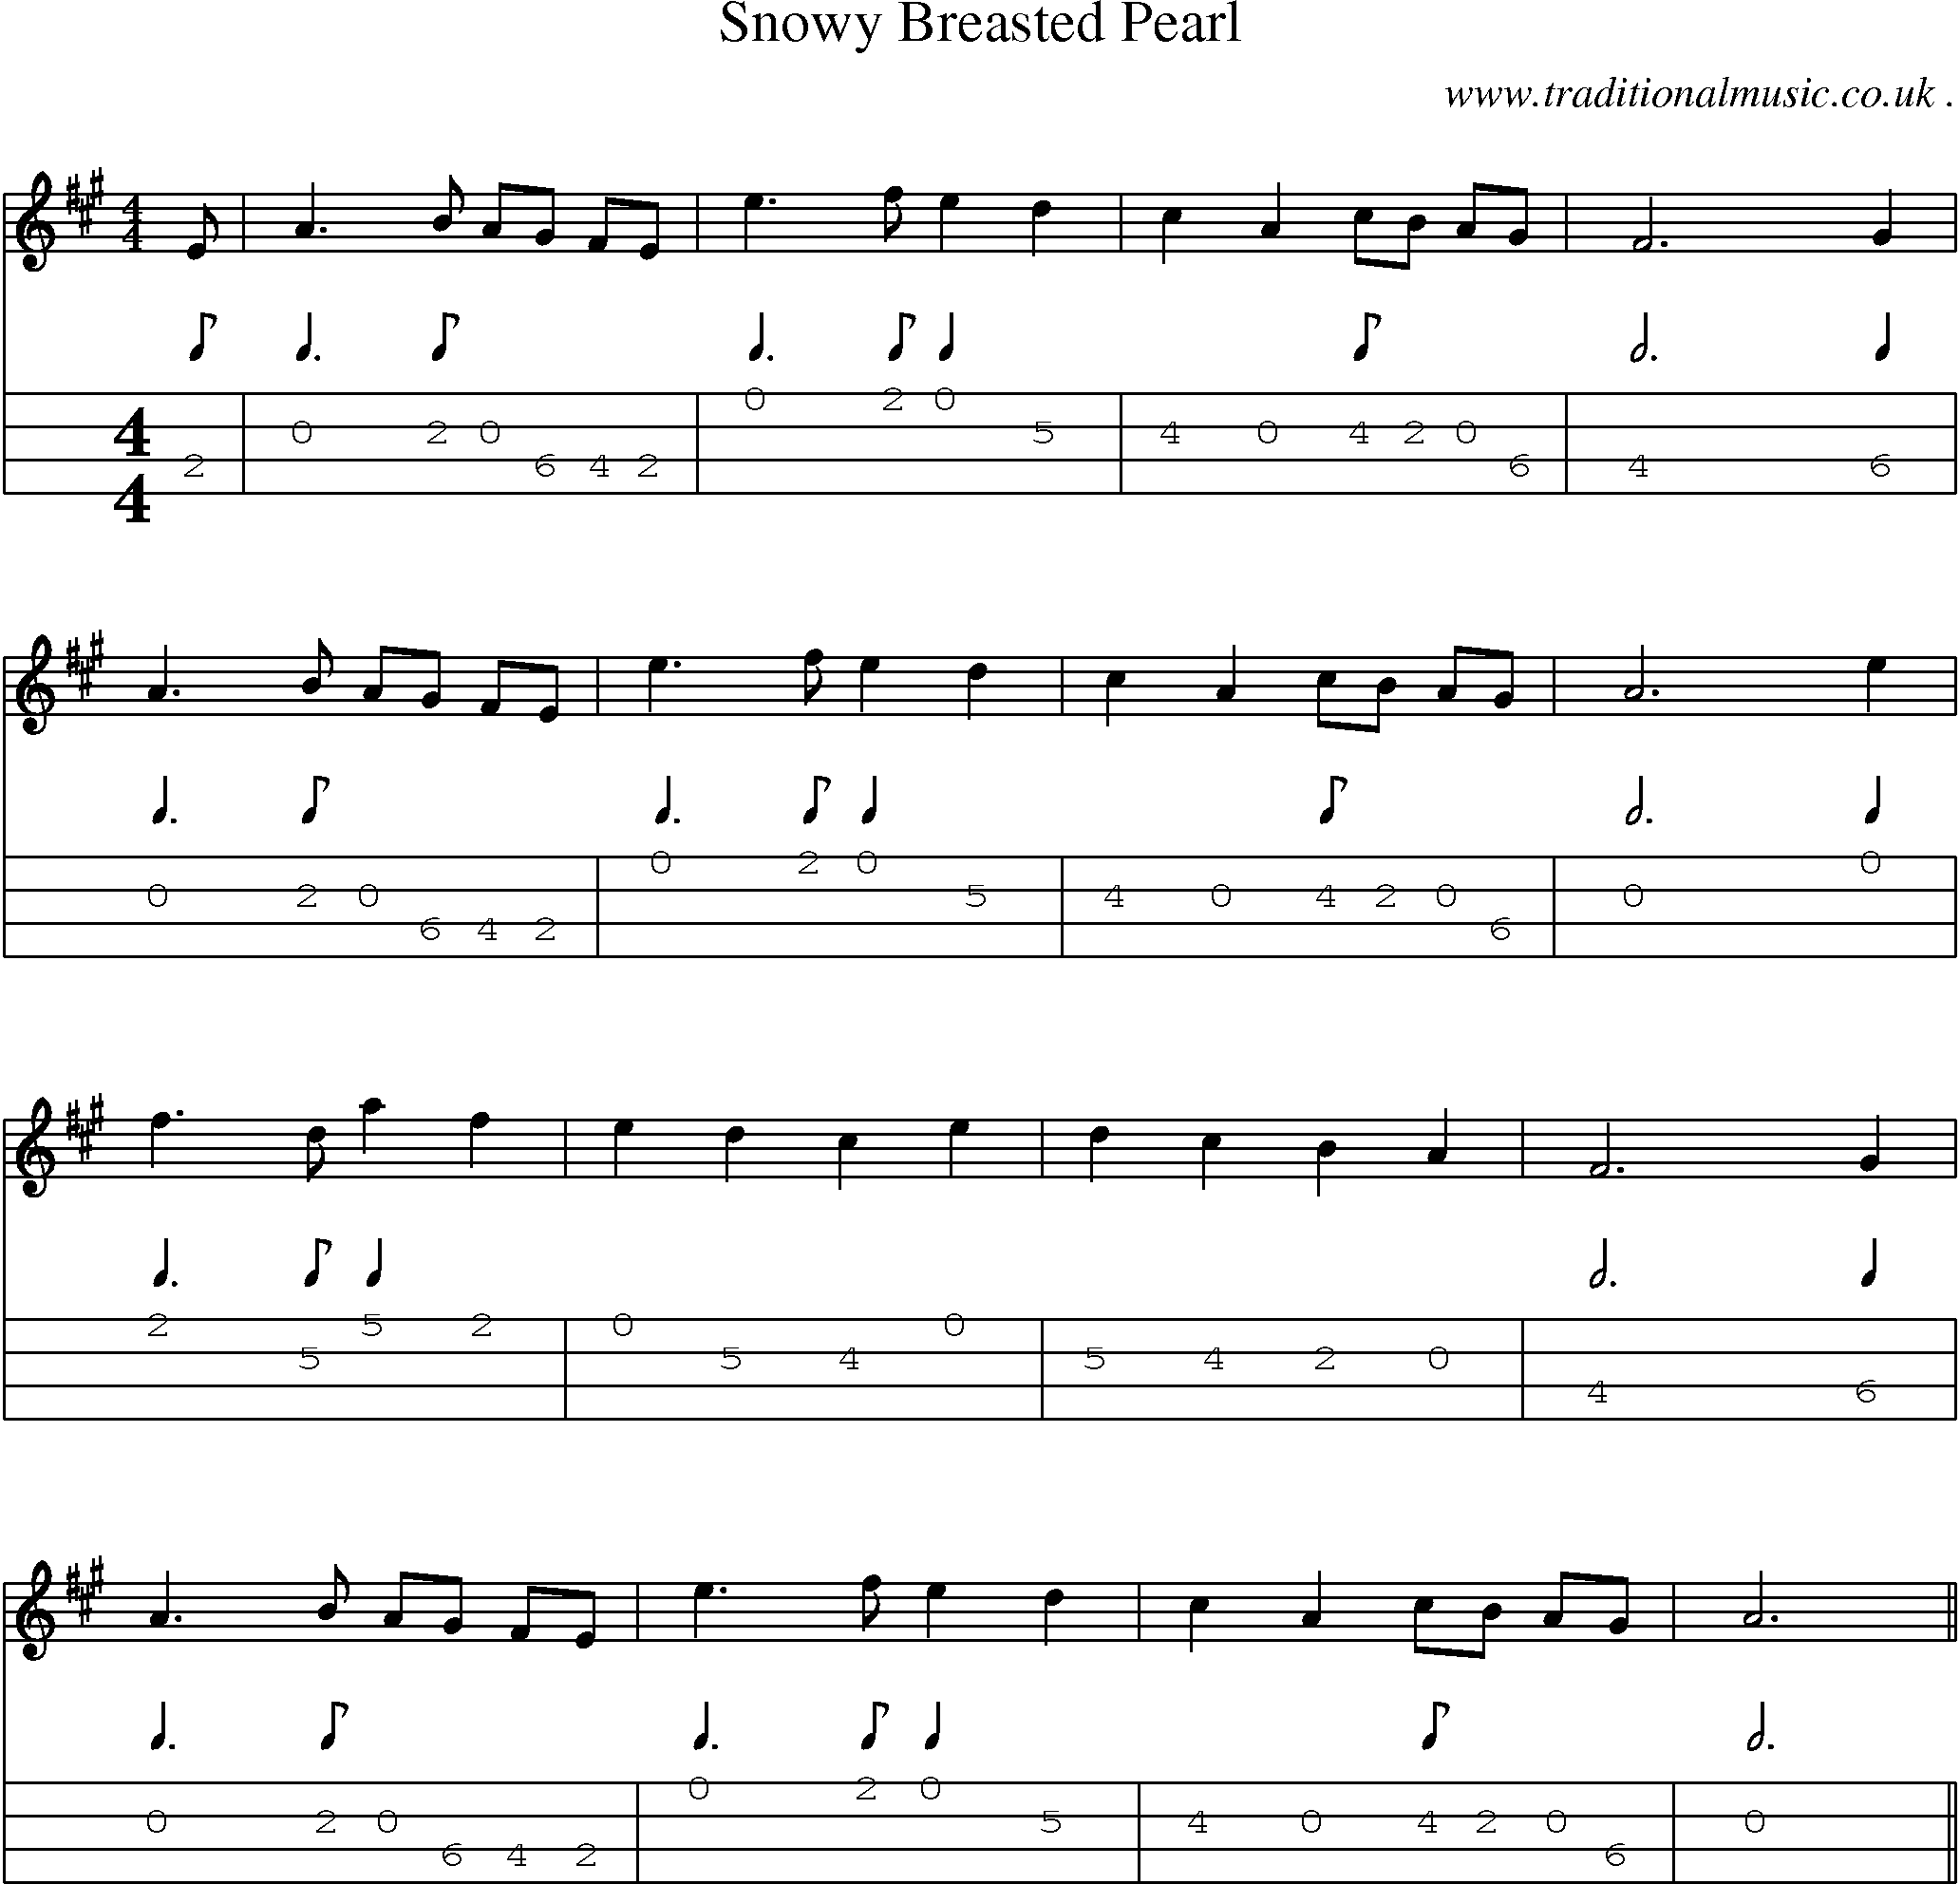 Sheet-Music and Mandolin Tabs for Snowy Breasted Pearl